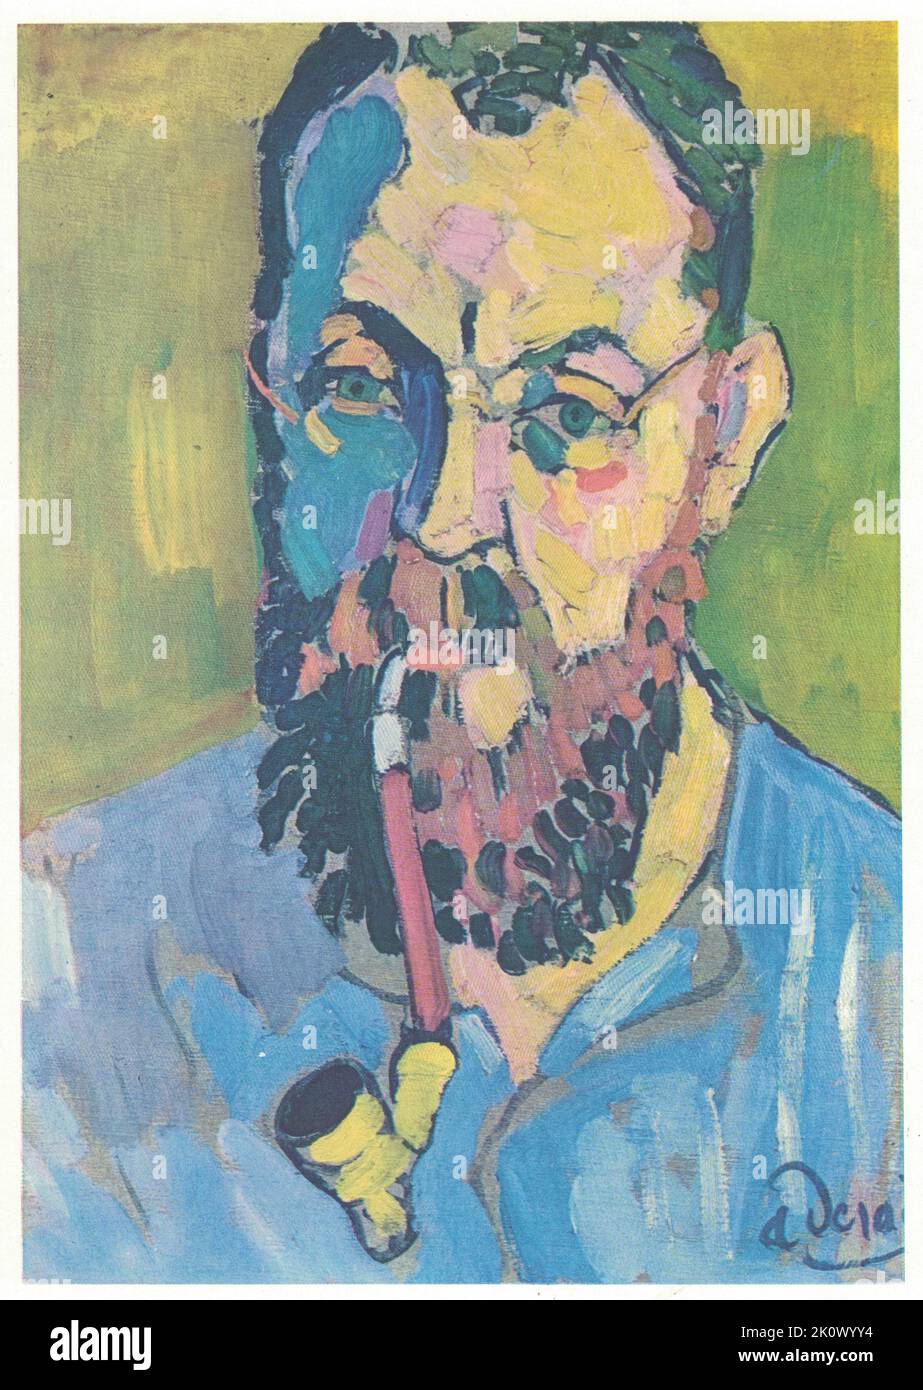 Portrait of Matisse, 1905. Painting by André Derain, oil, canvas.  André Derain is best known for his contributions to the developments of Fauvism and Cubism, two avant-garde movements from the beginning of the 20th century. Derain was born on June 17, 1880 in Chatou, just outside of Paris. He began his training by attending painting classes under French symbolist, Eugène Carrière at the Académie Carriere (1898-1899). While at school, he befriended Henri Matisse, and in 1900, he met Maurice de Vlaminck, with whom he later shared a studio. The three often painted together, and were instrumental Stock Photo